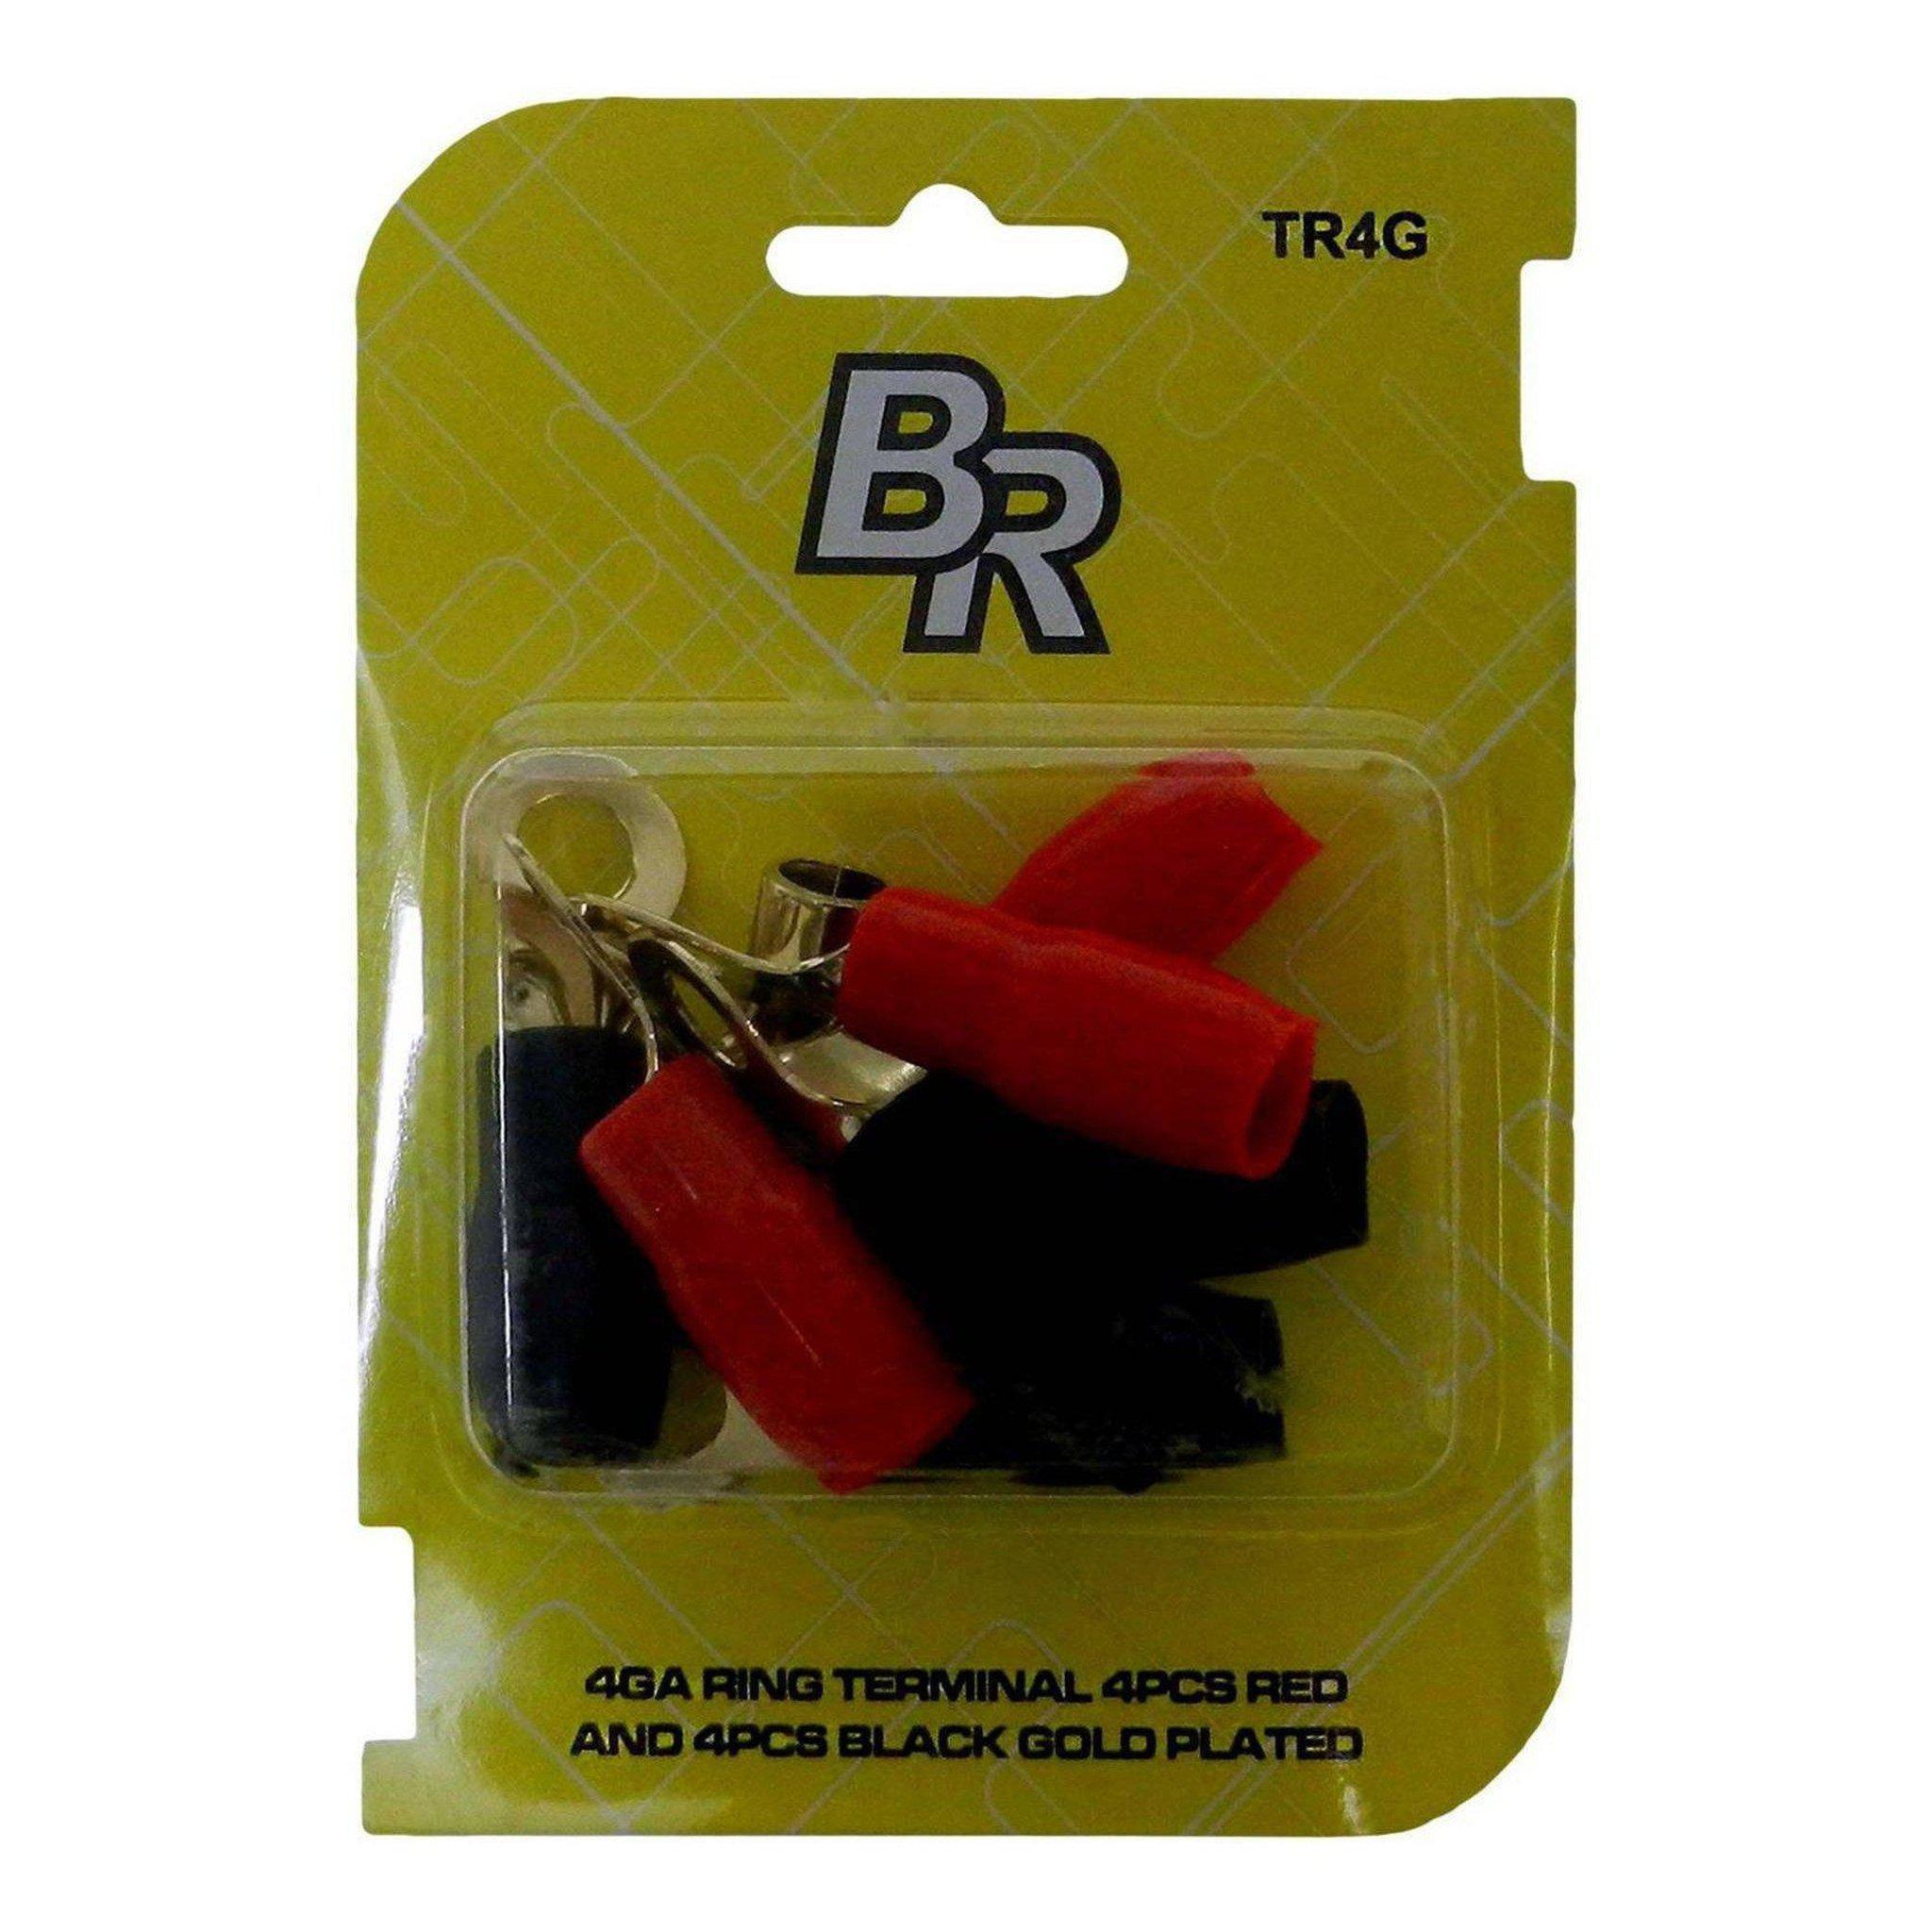 TR4G Black/Red Gold Plated Ring Terminal Crimp Connectors 4GA (8 pieces)-Bass Rockers-5